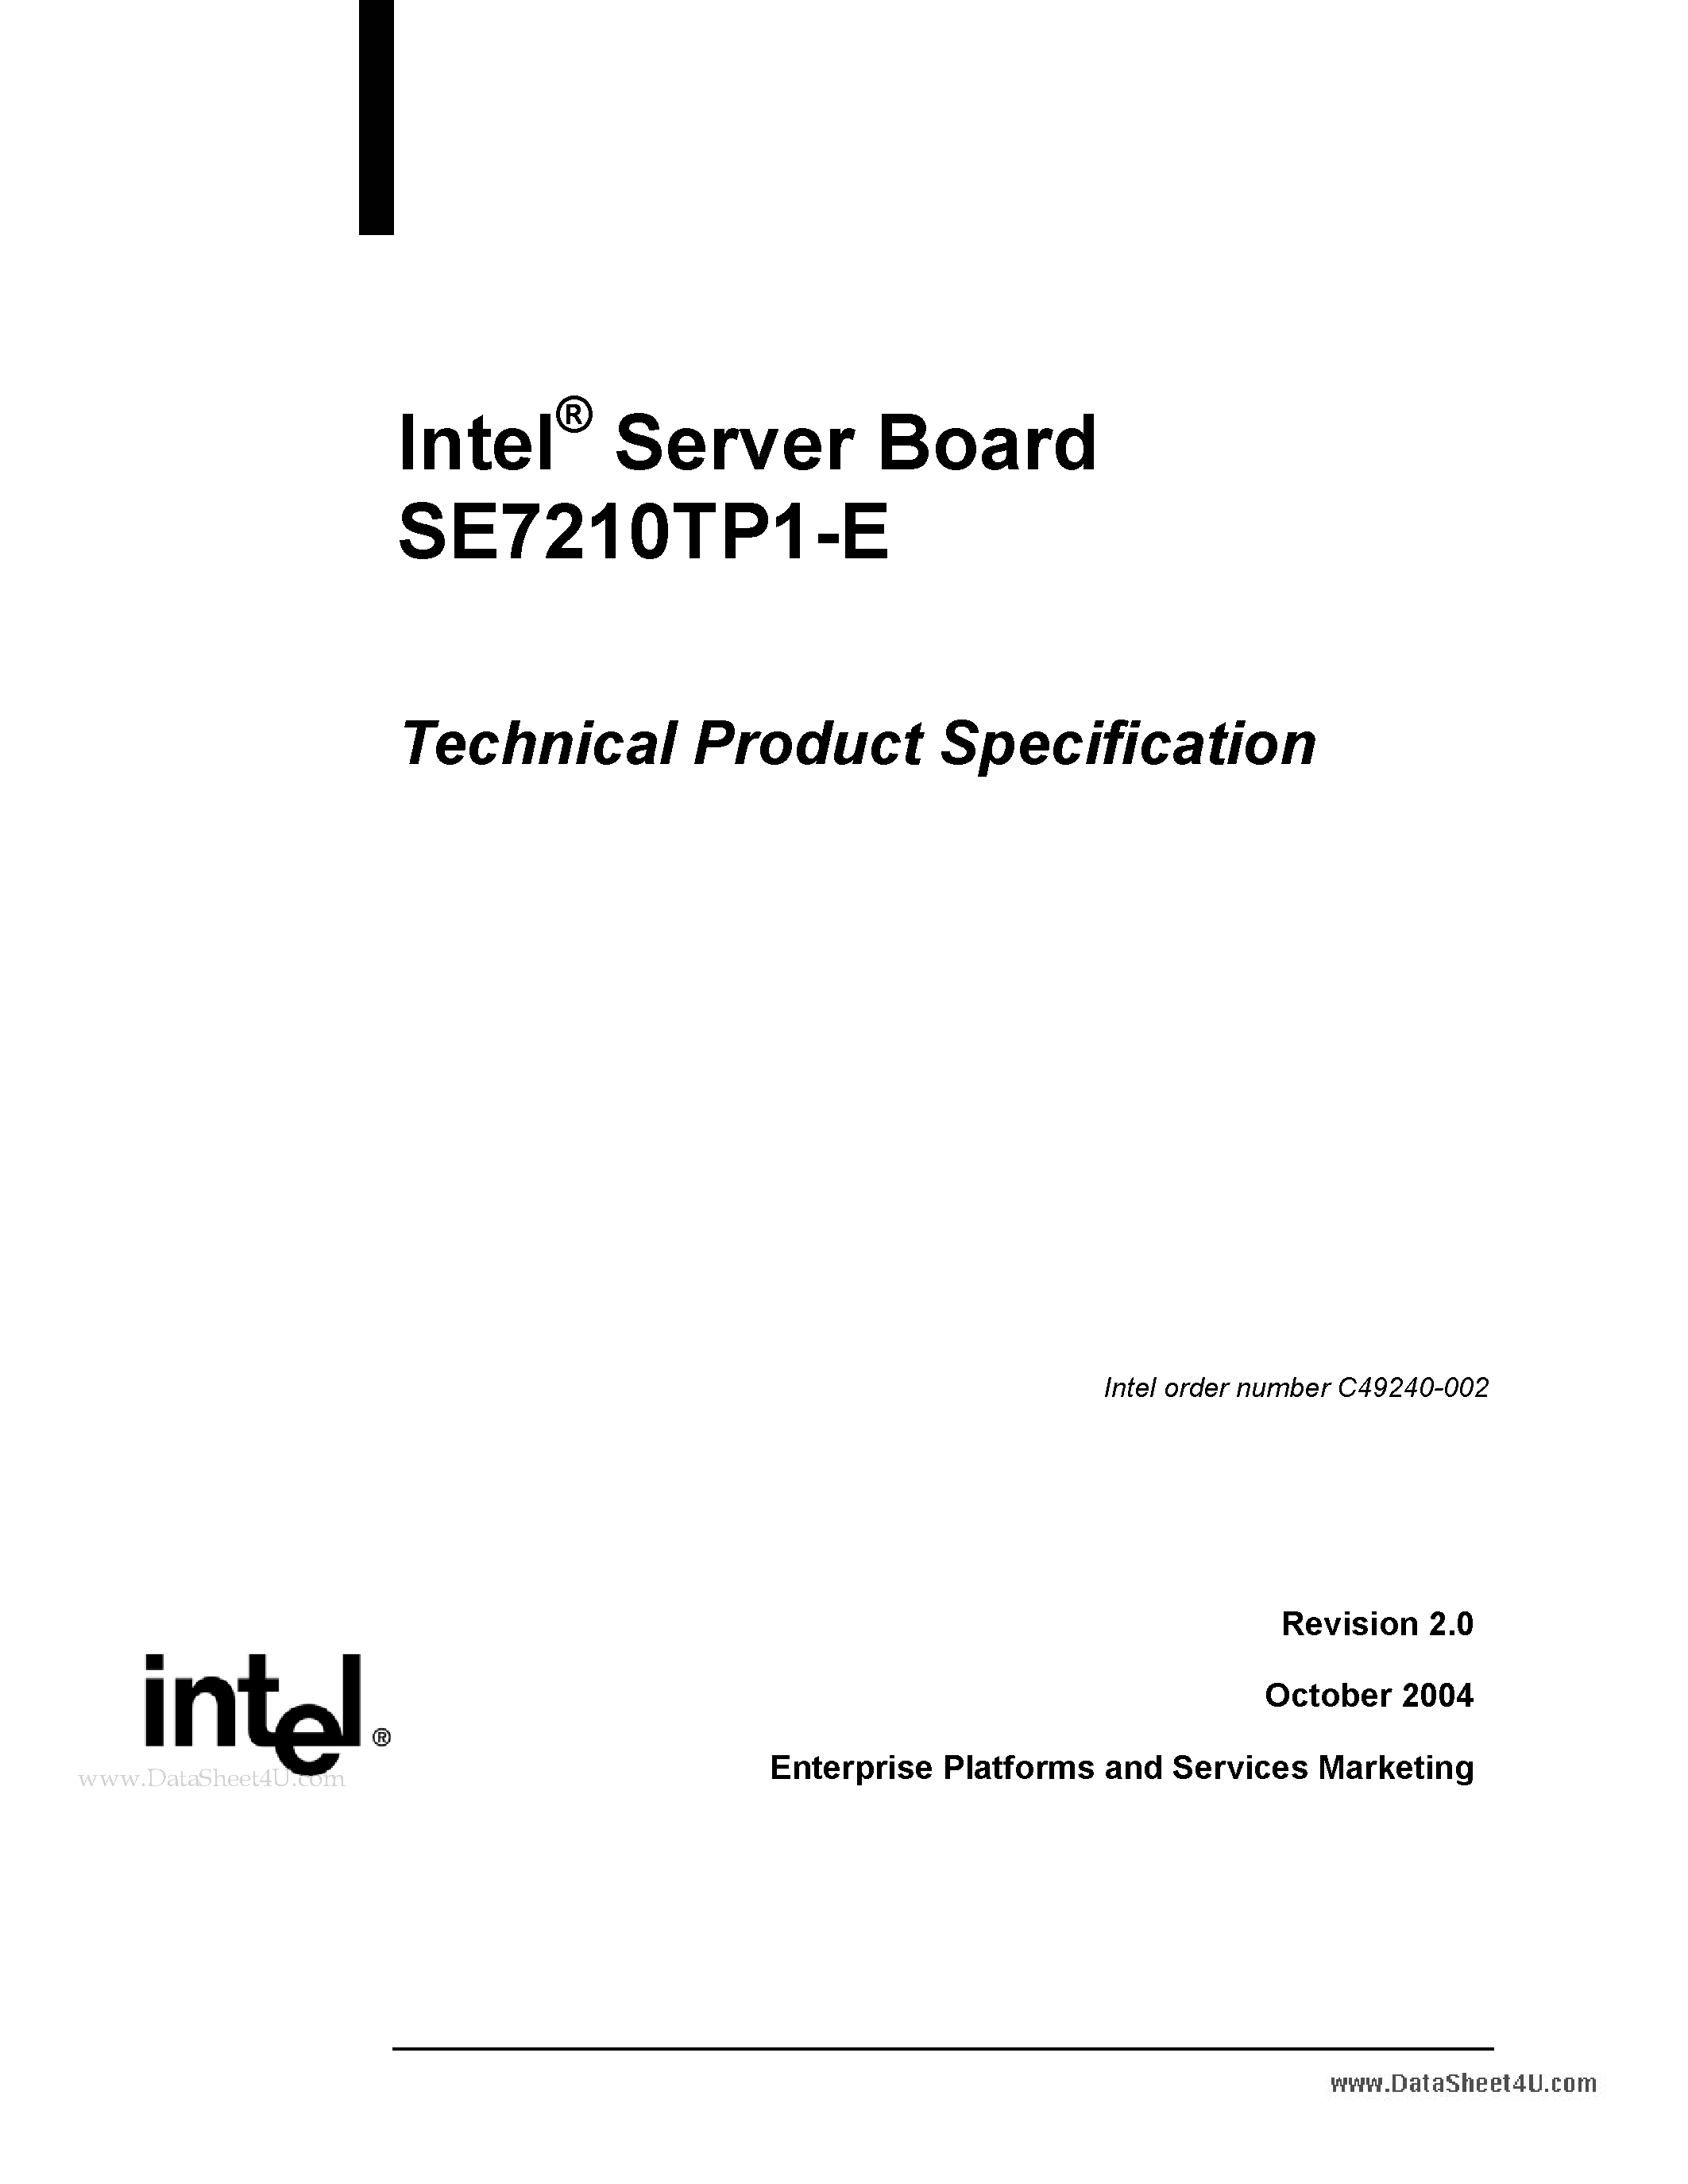 Даташит SE7210TP1-E - Server Board Technical Product Specification страница 1